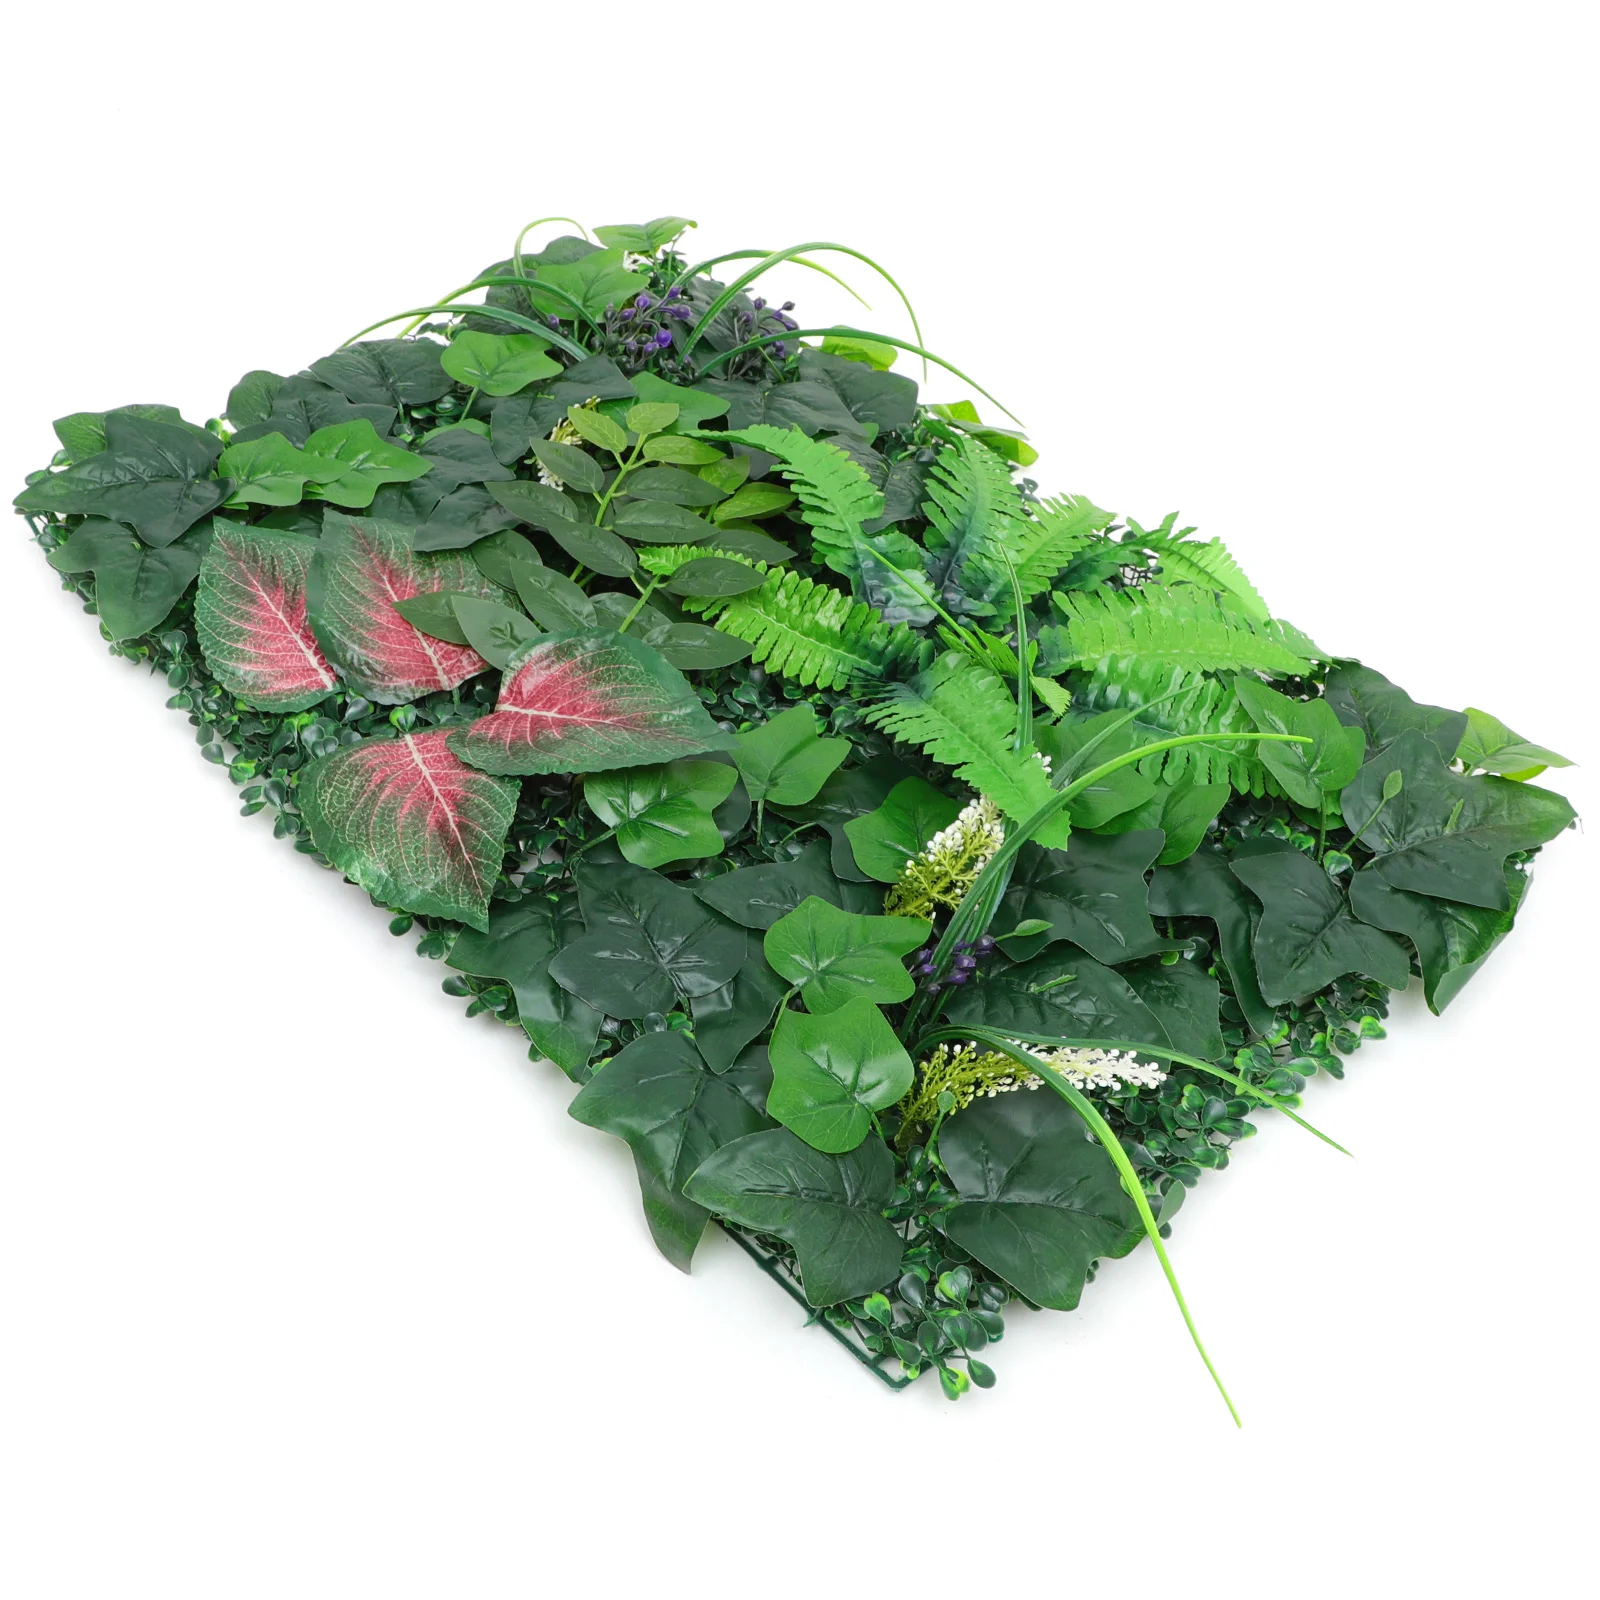 

Green Wall Decoration Plant Walls Artificial Fake for Door Background Greenery with Leaves Backdrop Plastic Lawns Plants